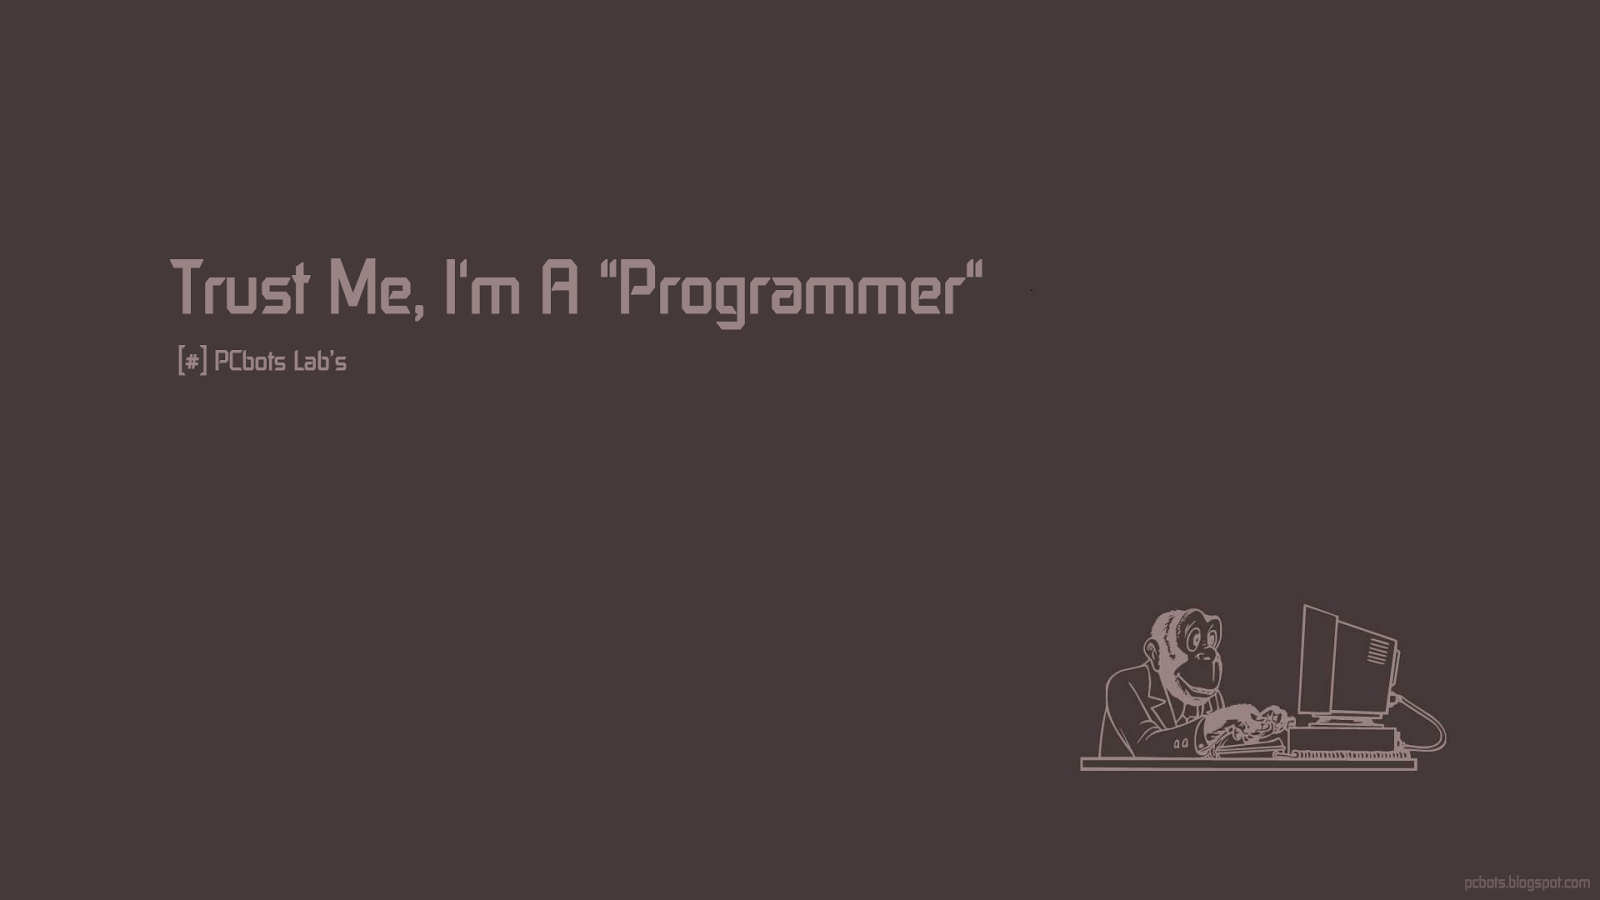 Programmers And Coders Wallpaper HD By Pcbots Part Ii